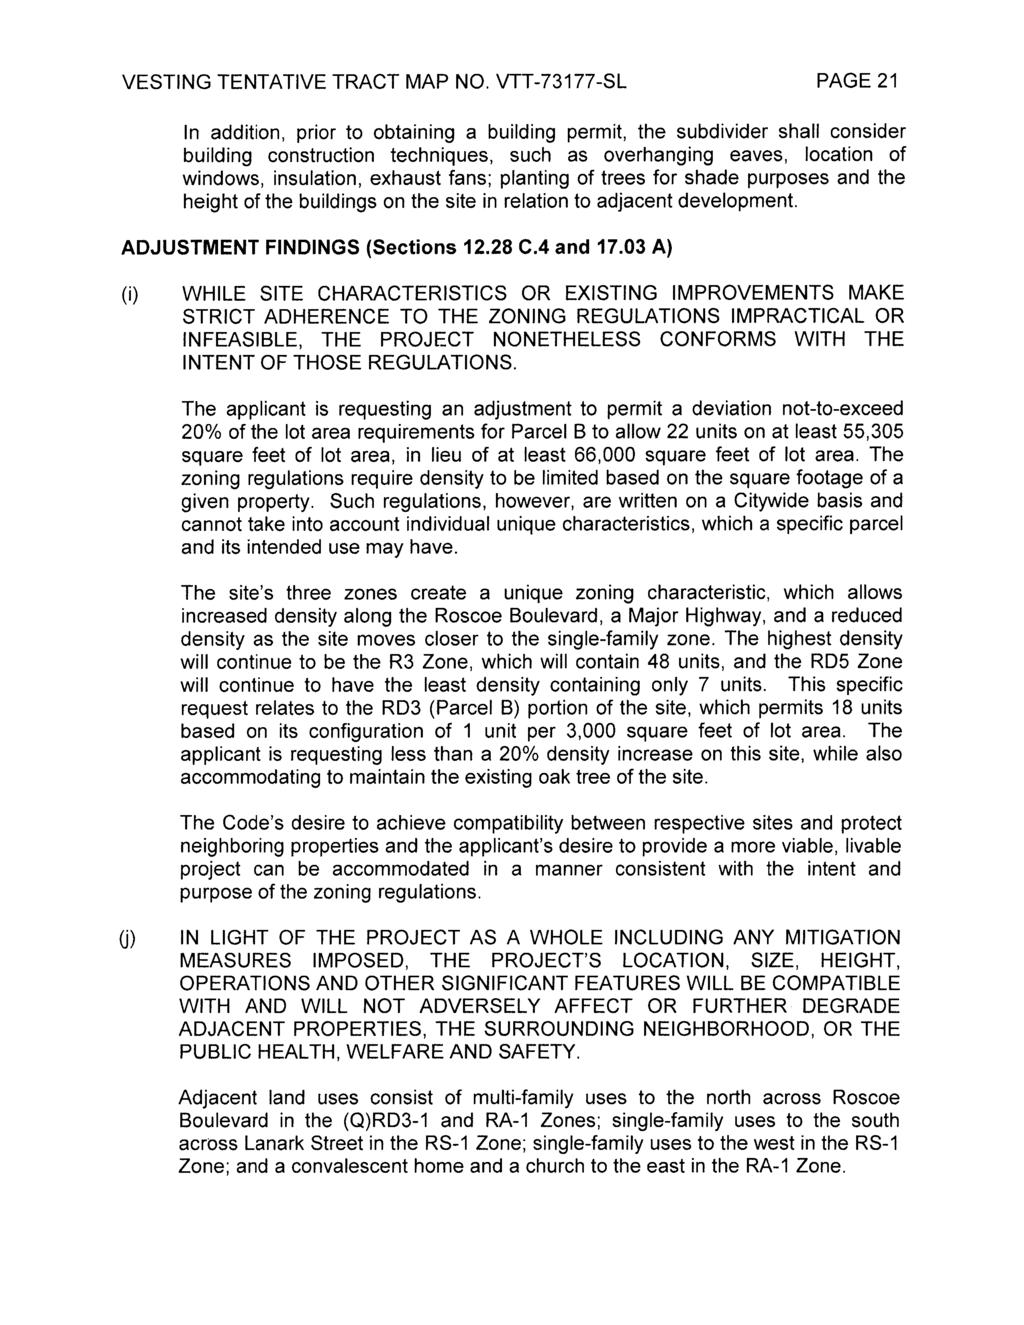 PAGE 21 In addition, prior to obtaining a building permit, the subdivider shall consider building construction techniques, such as overhanging eaves, location of windows, insulation, exhaust fans;